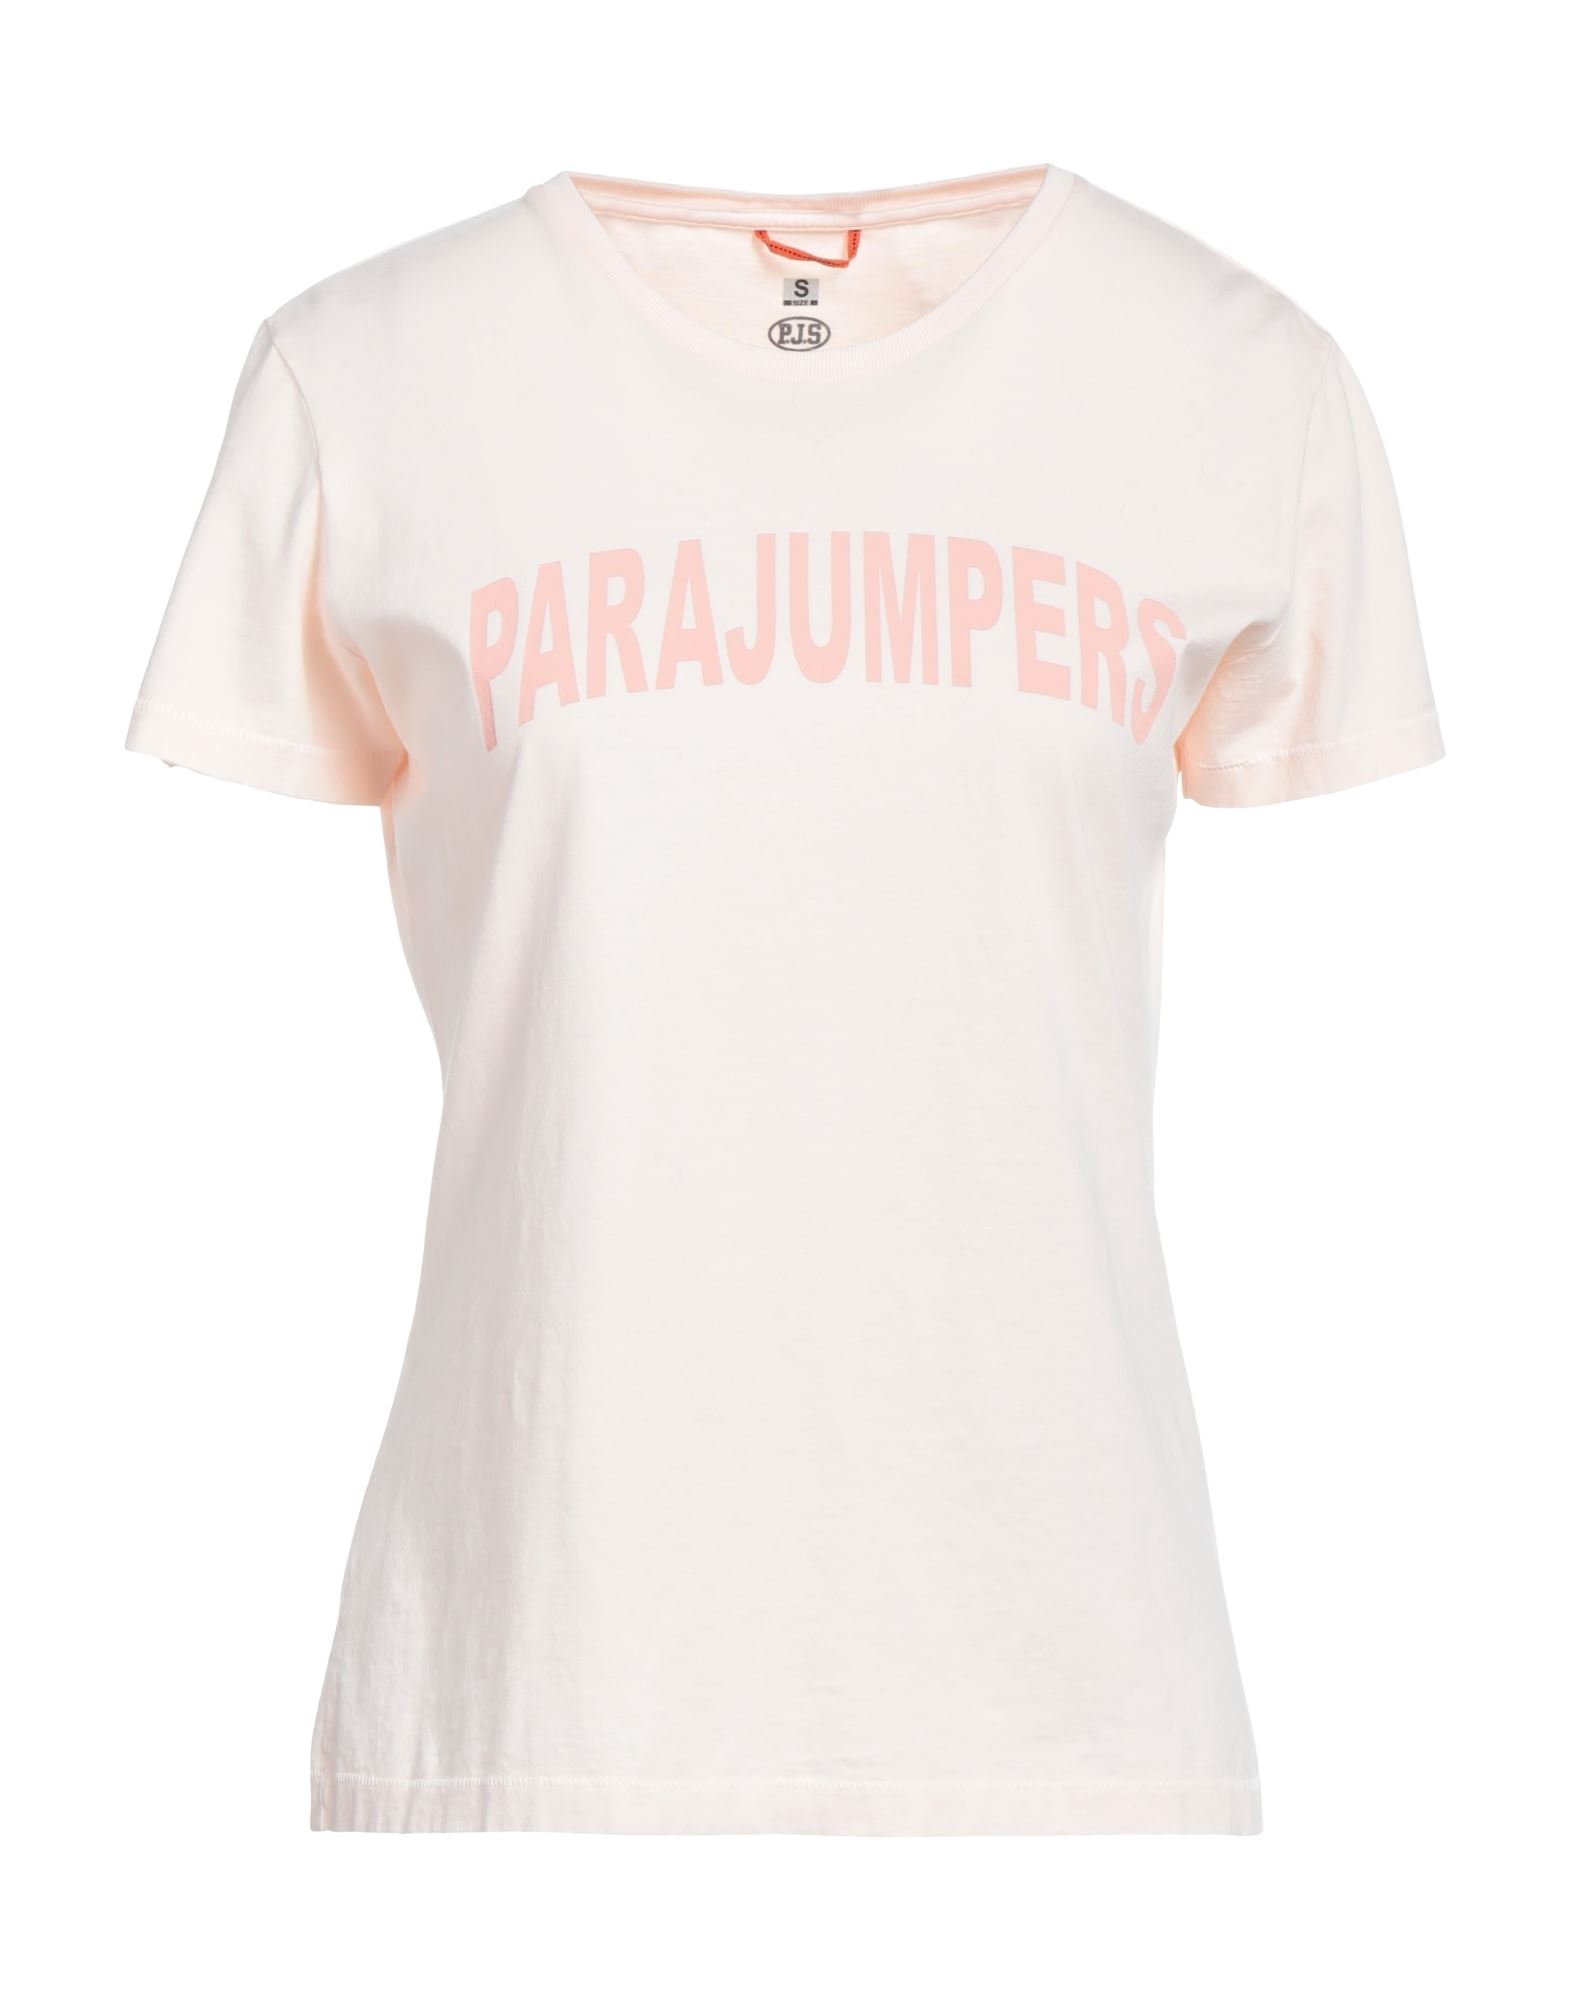 Parajumpers Woman T-shirt Blush Size Xxl Cotton In Pink